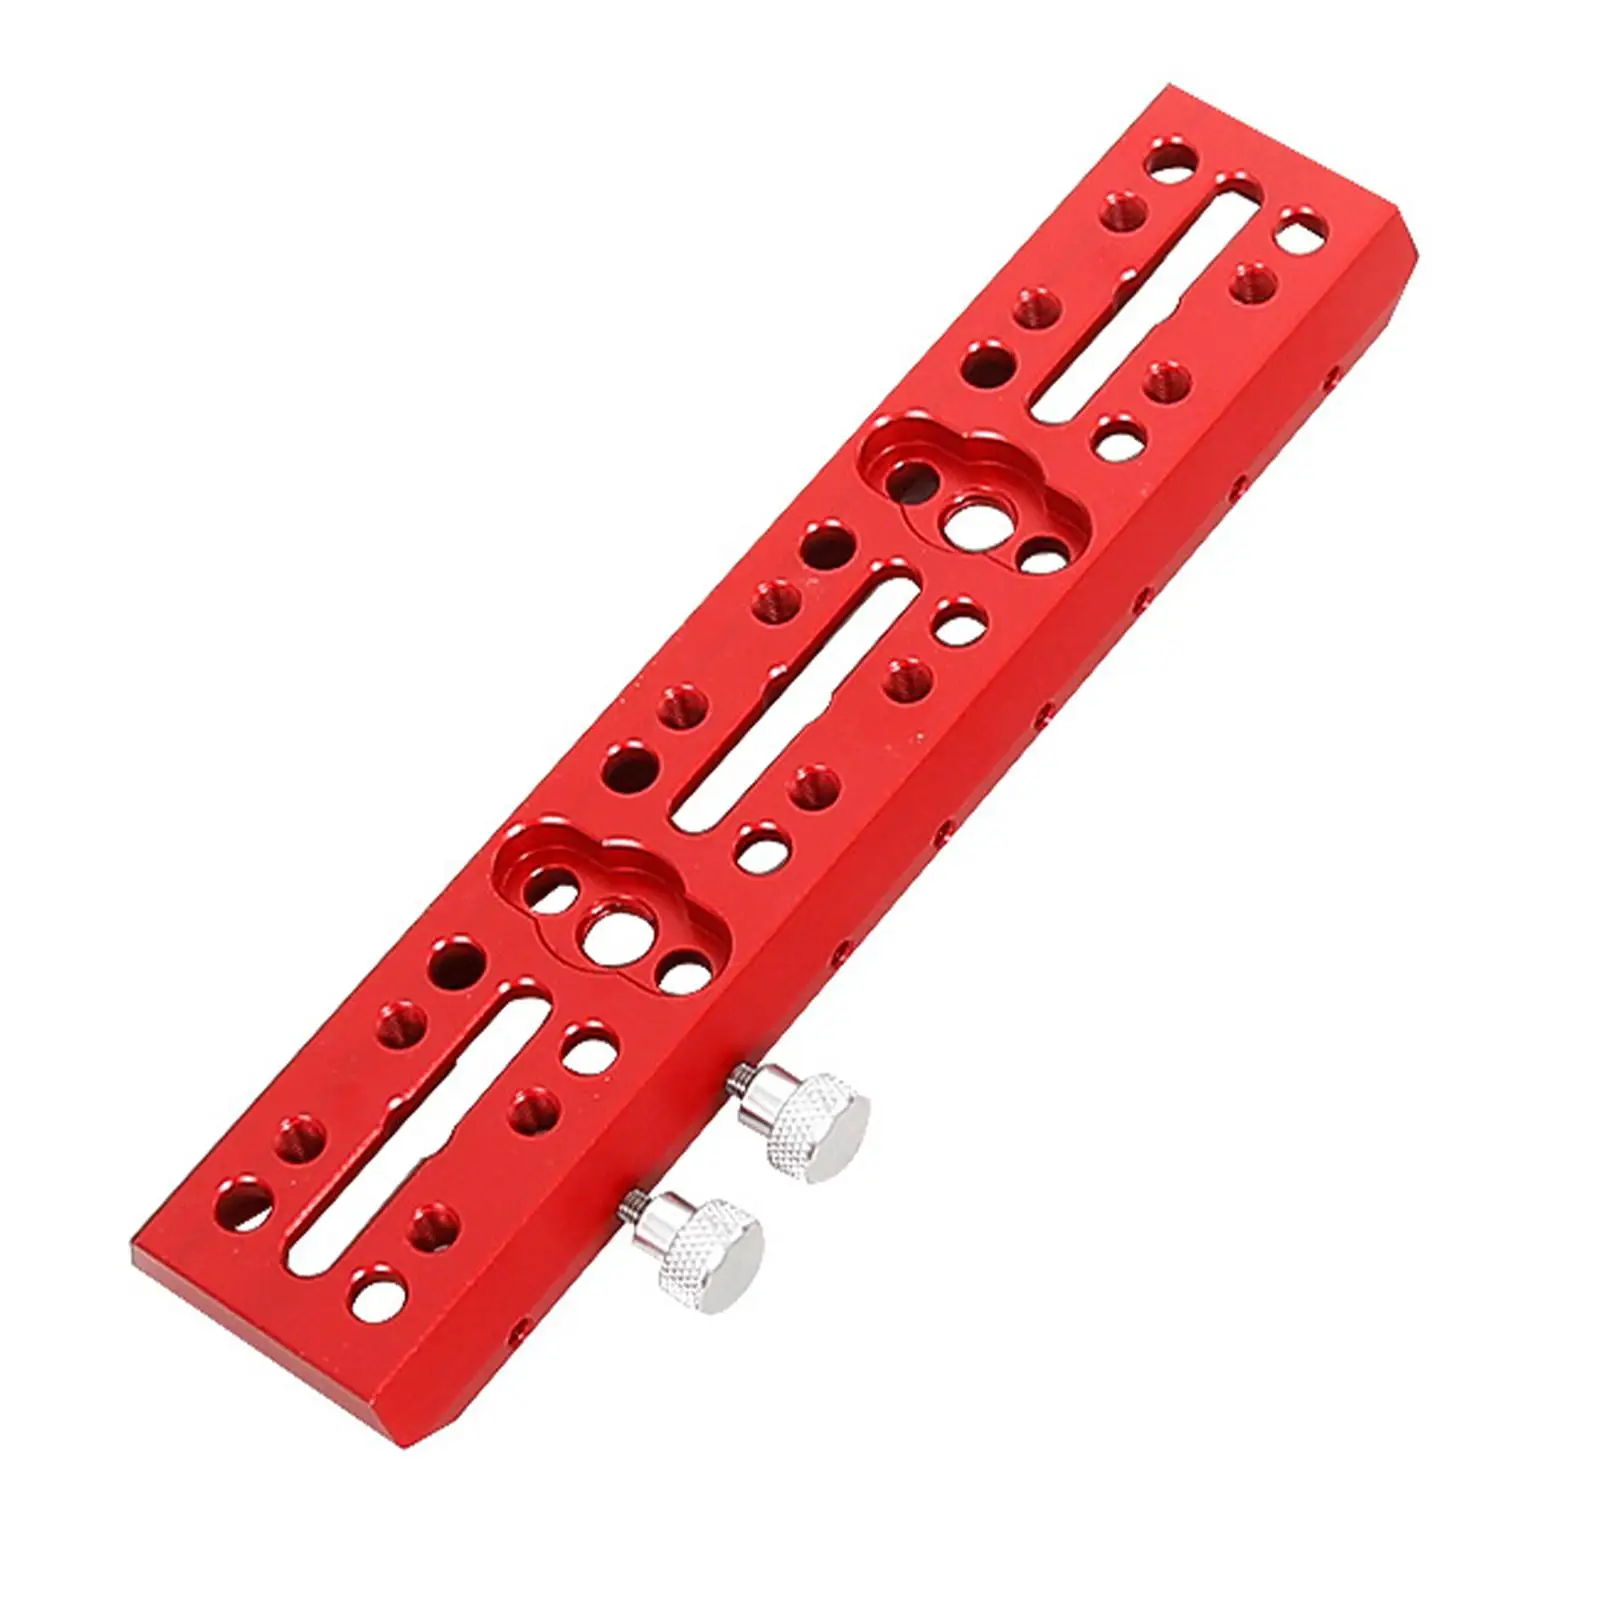 Telescope Dovetail Mounting Plate Standard Dovetail Plate for 2042 Durable